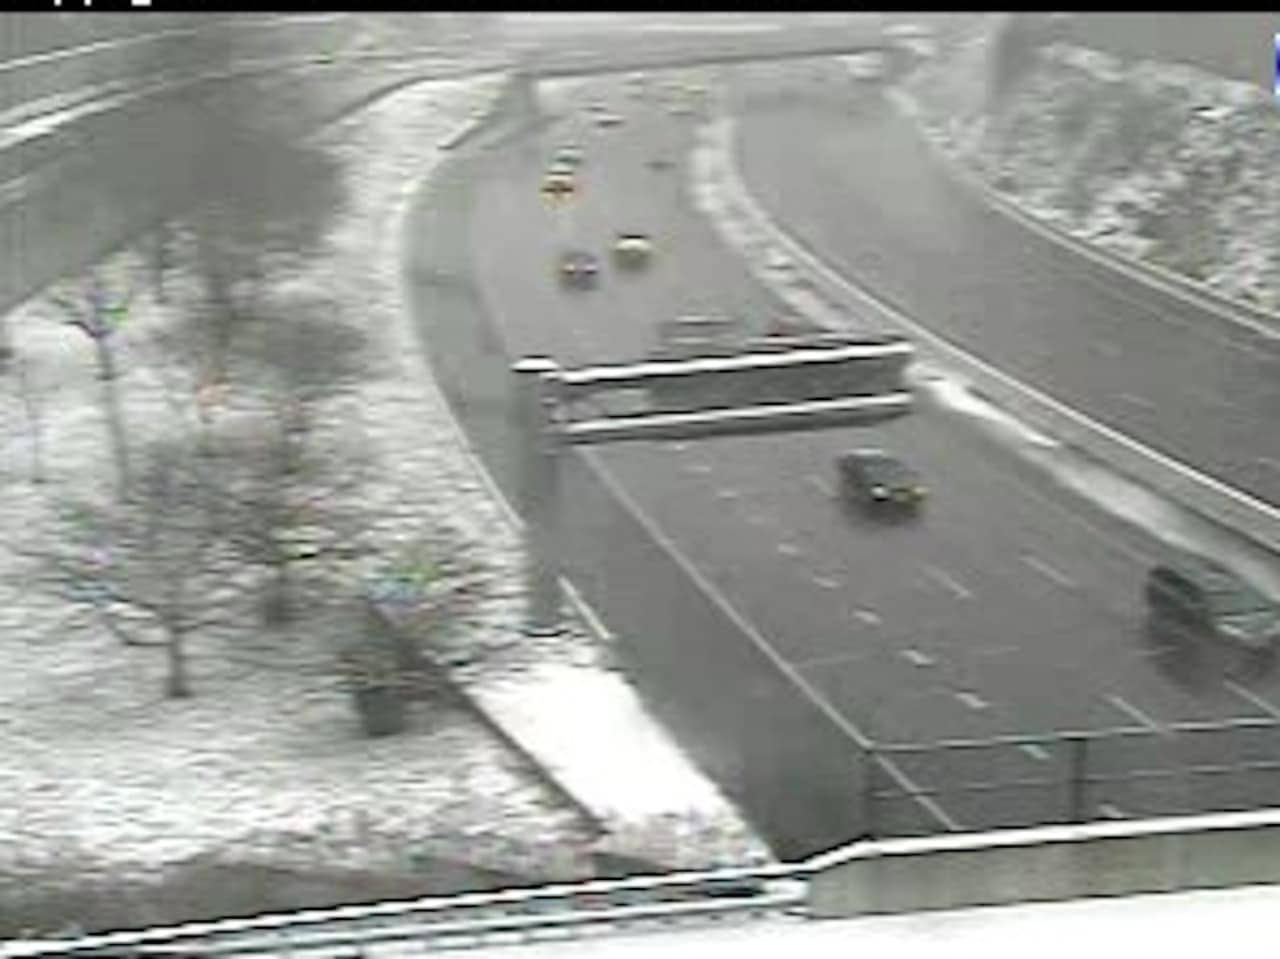 I-287 and the Taconic State Parkway in North White Plains early Saturday afternoon.